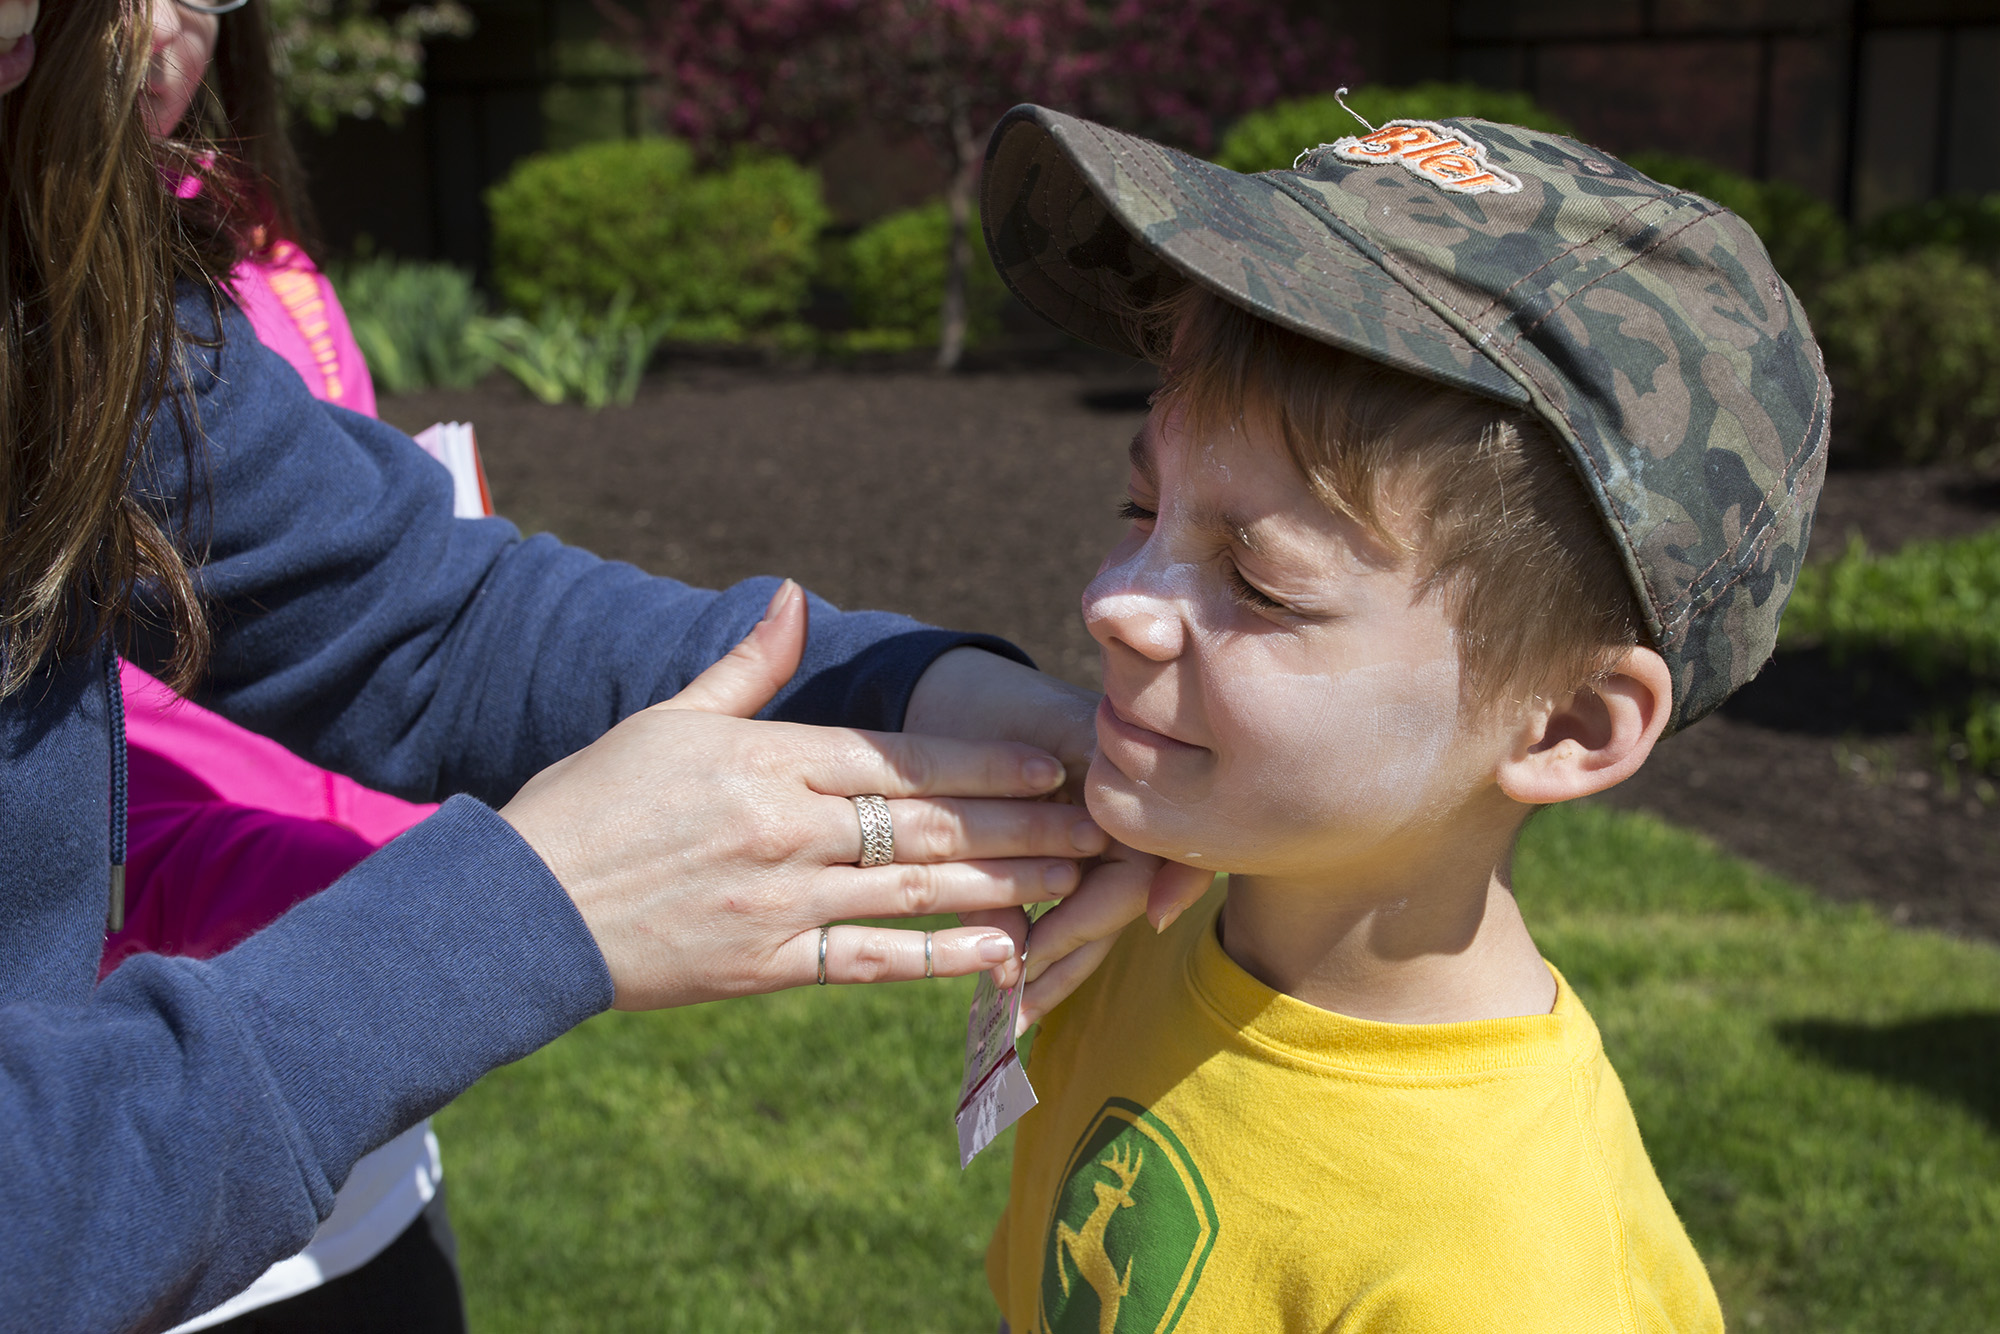 Natasha Reitz puts sunscreen on her son, Winter Reitz, 8, at the Colleges Against Cancer booth during Imagine RIT: Innovation and Creativity Festival on the Rochester Institute of Technology campus in Rochester, N.Y., May 7, 2016.  (Photo by Bridget Fetsko) #imaginerit #ritpj